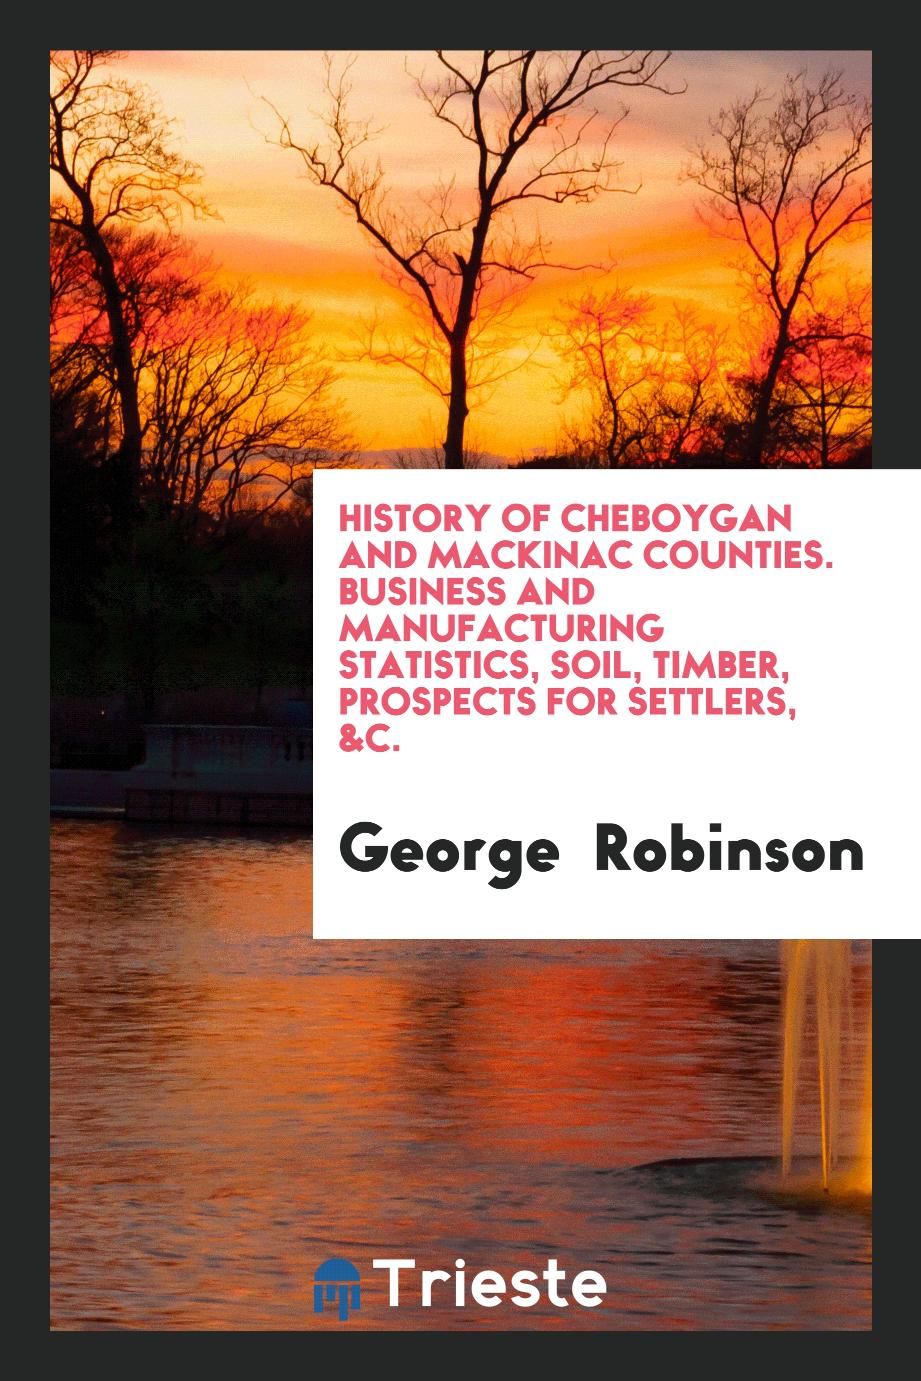 History of Cheboygan and Mackinac Counties. Business and Manufacturing Statistics, Soil, Timber, Prospects for Settlers, &c.